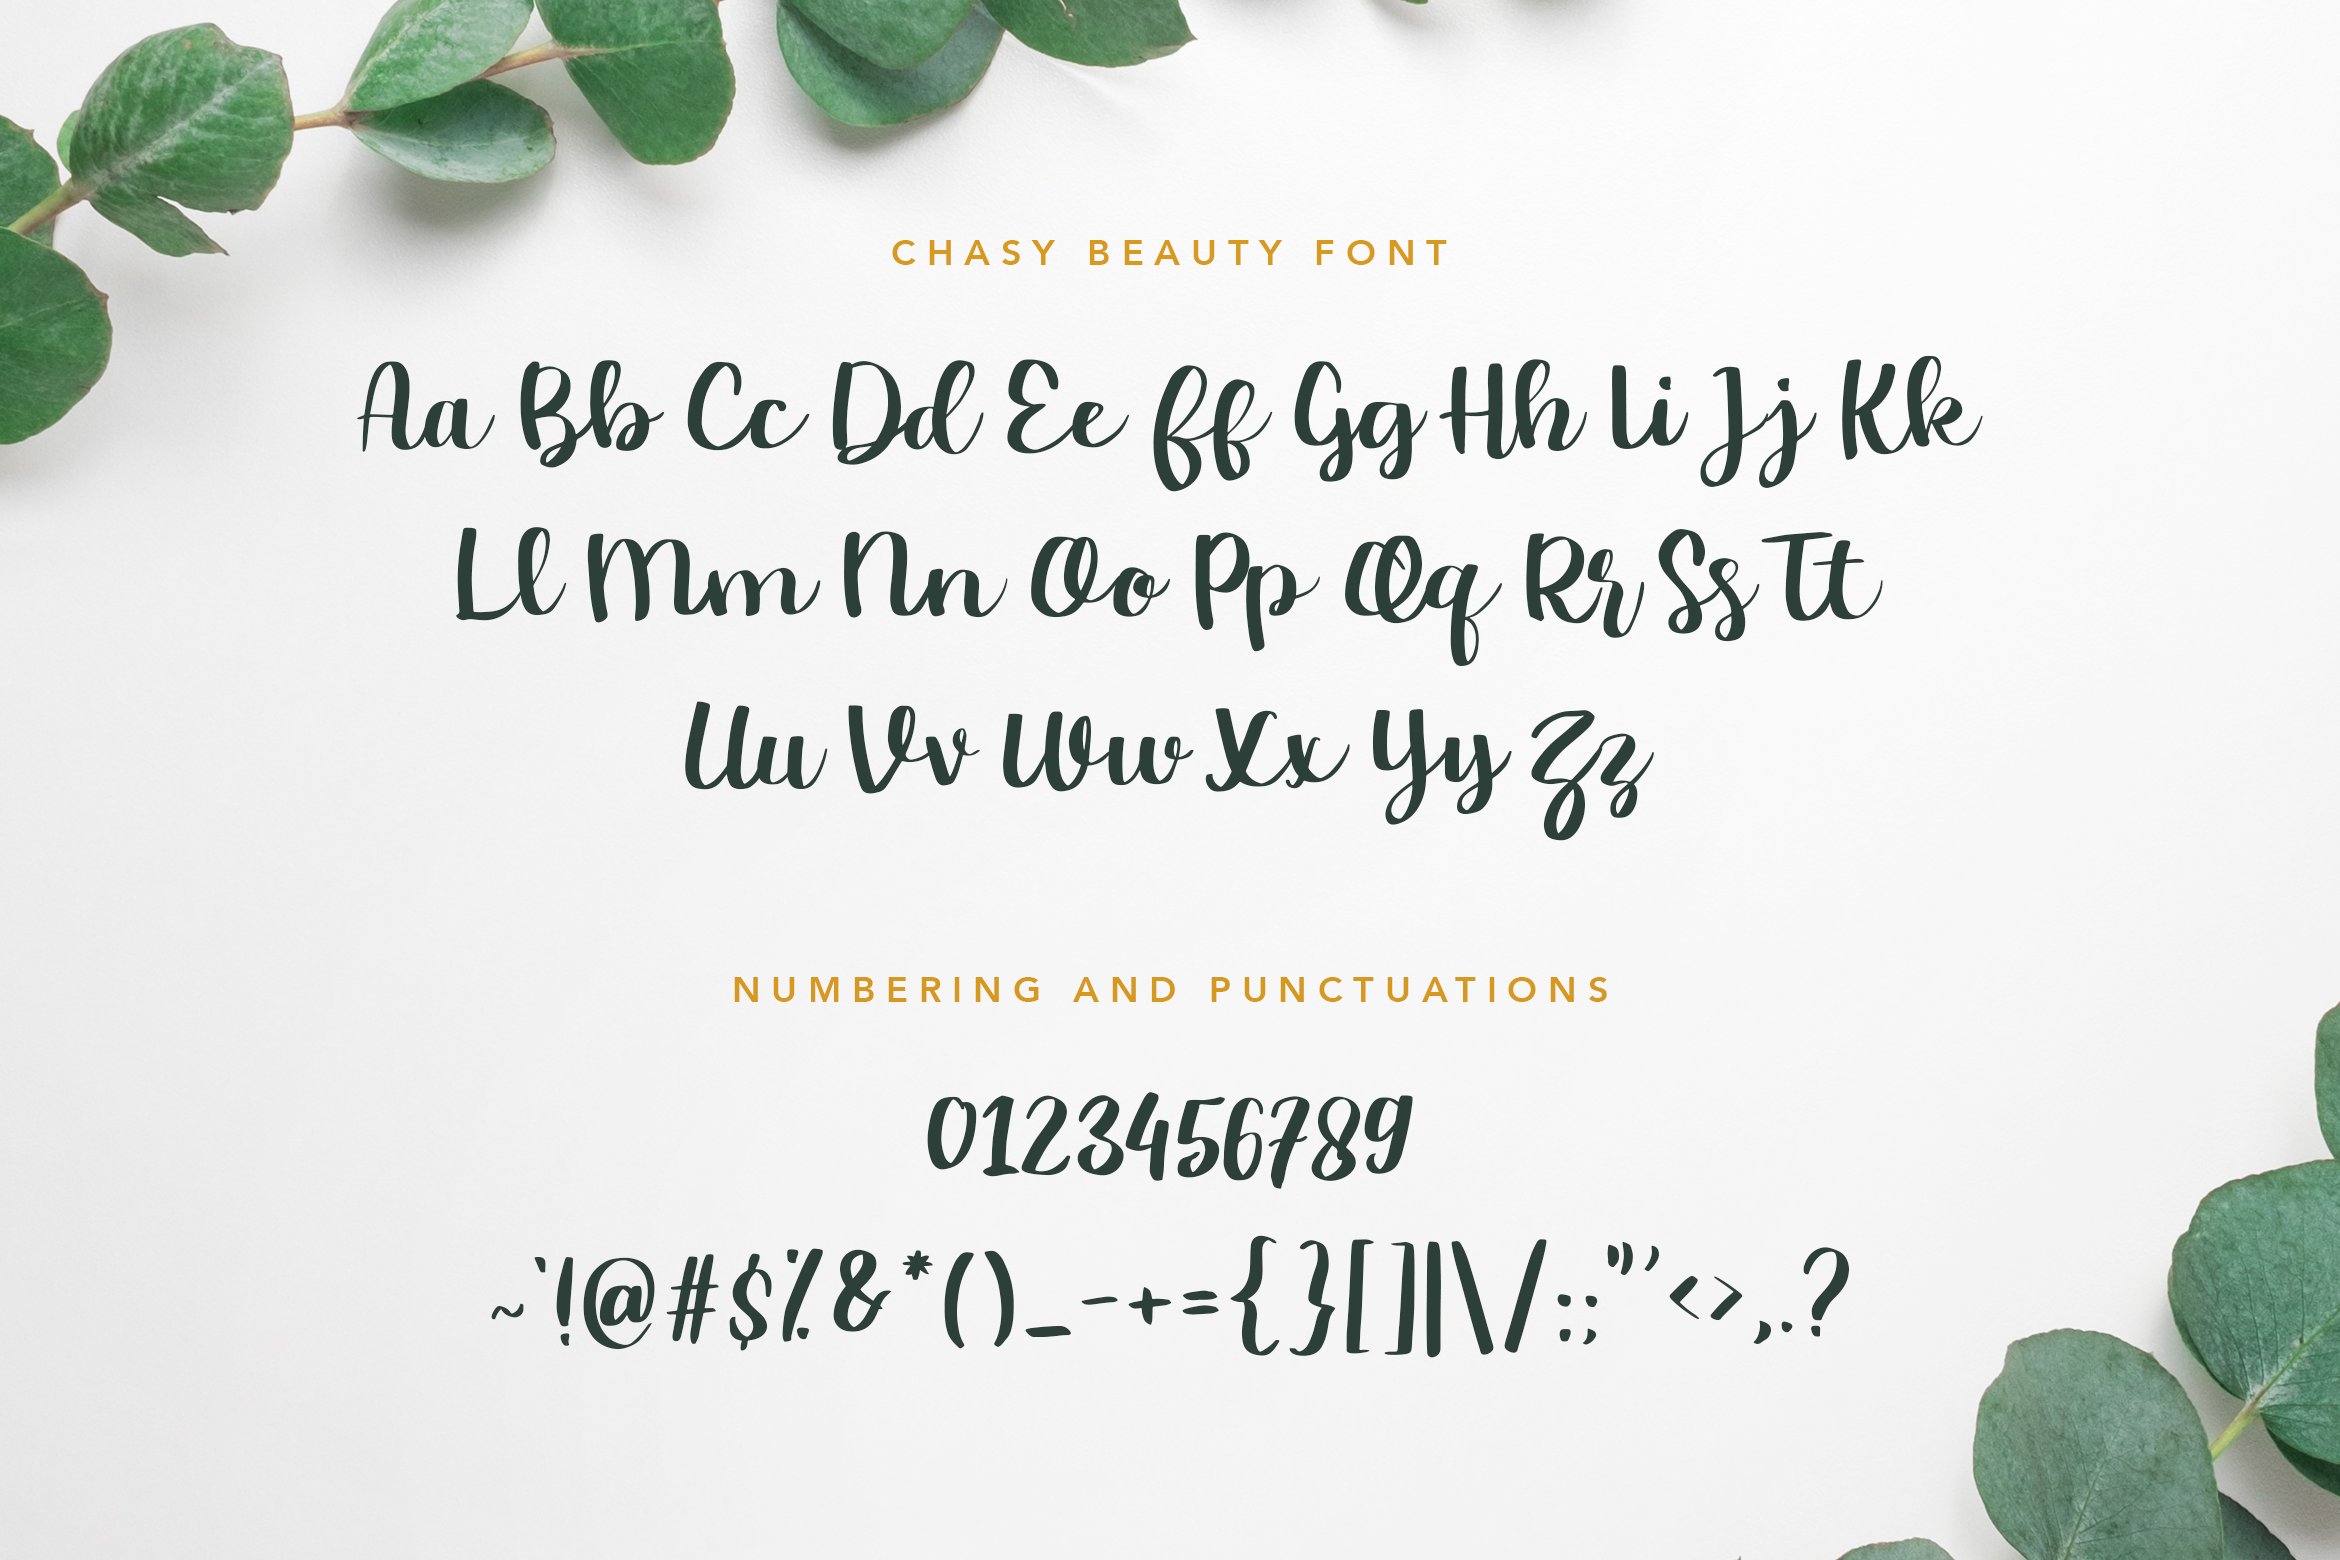 General view of the Chasy Beauty Font.